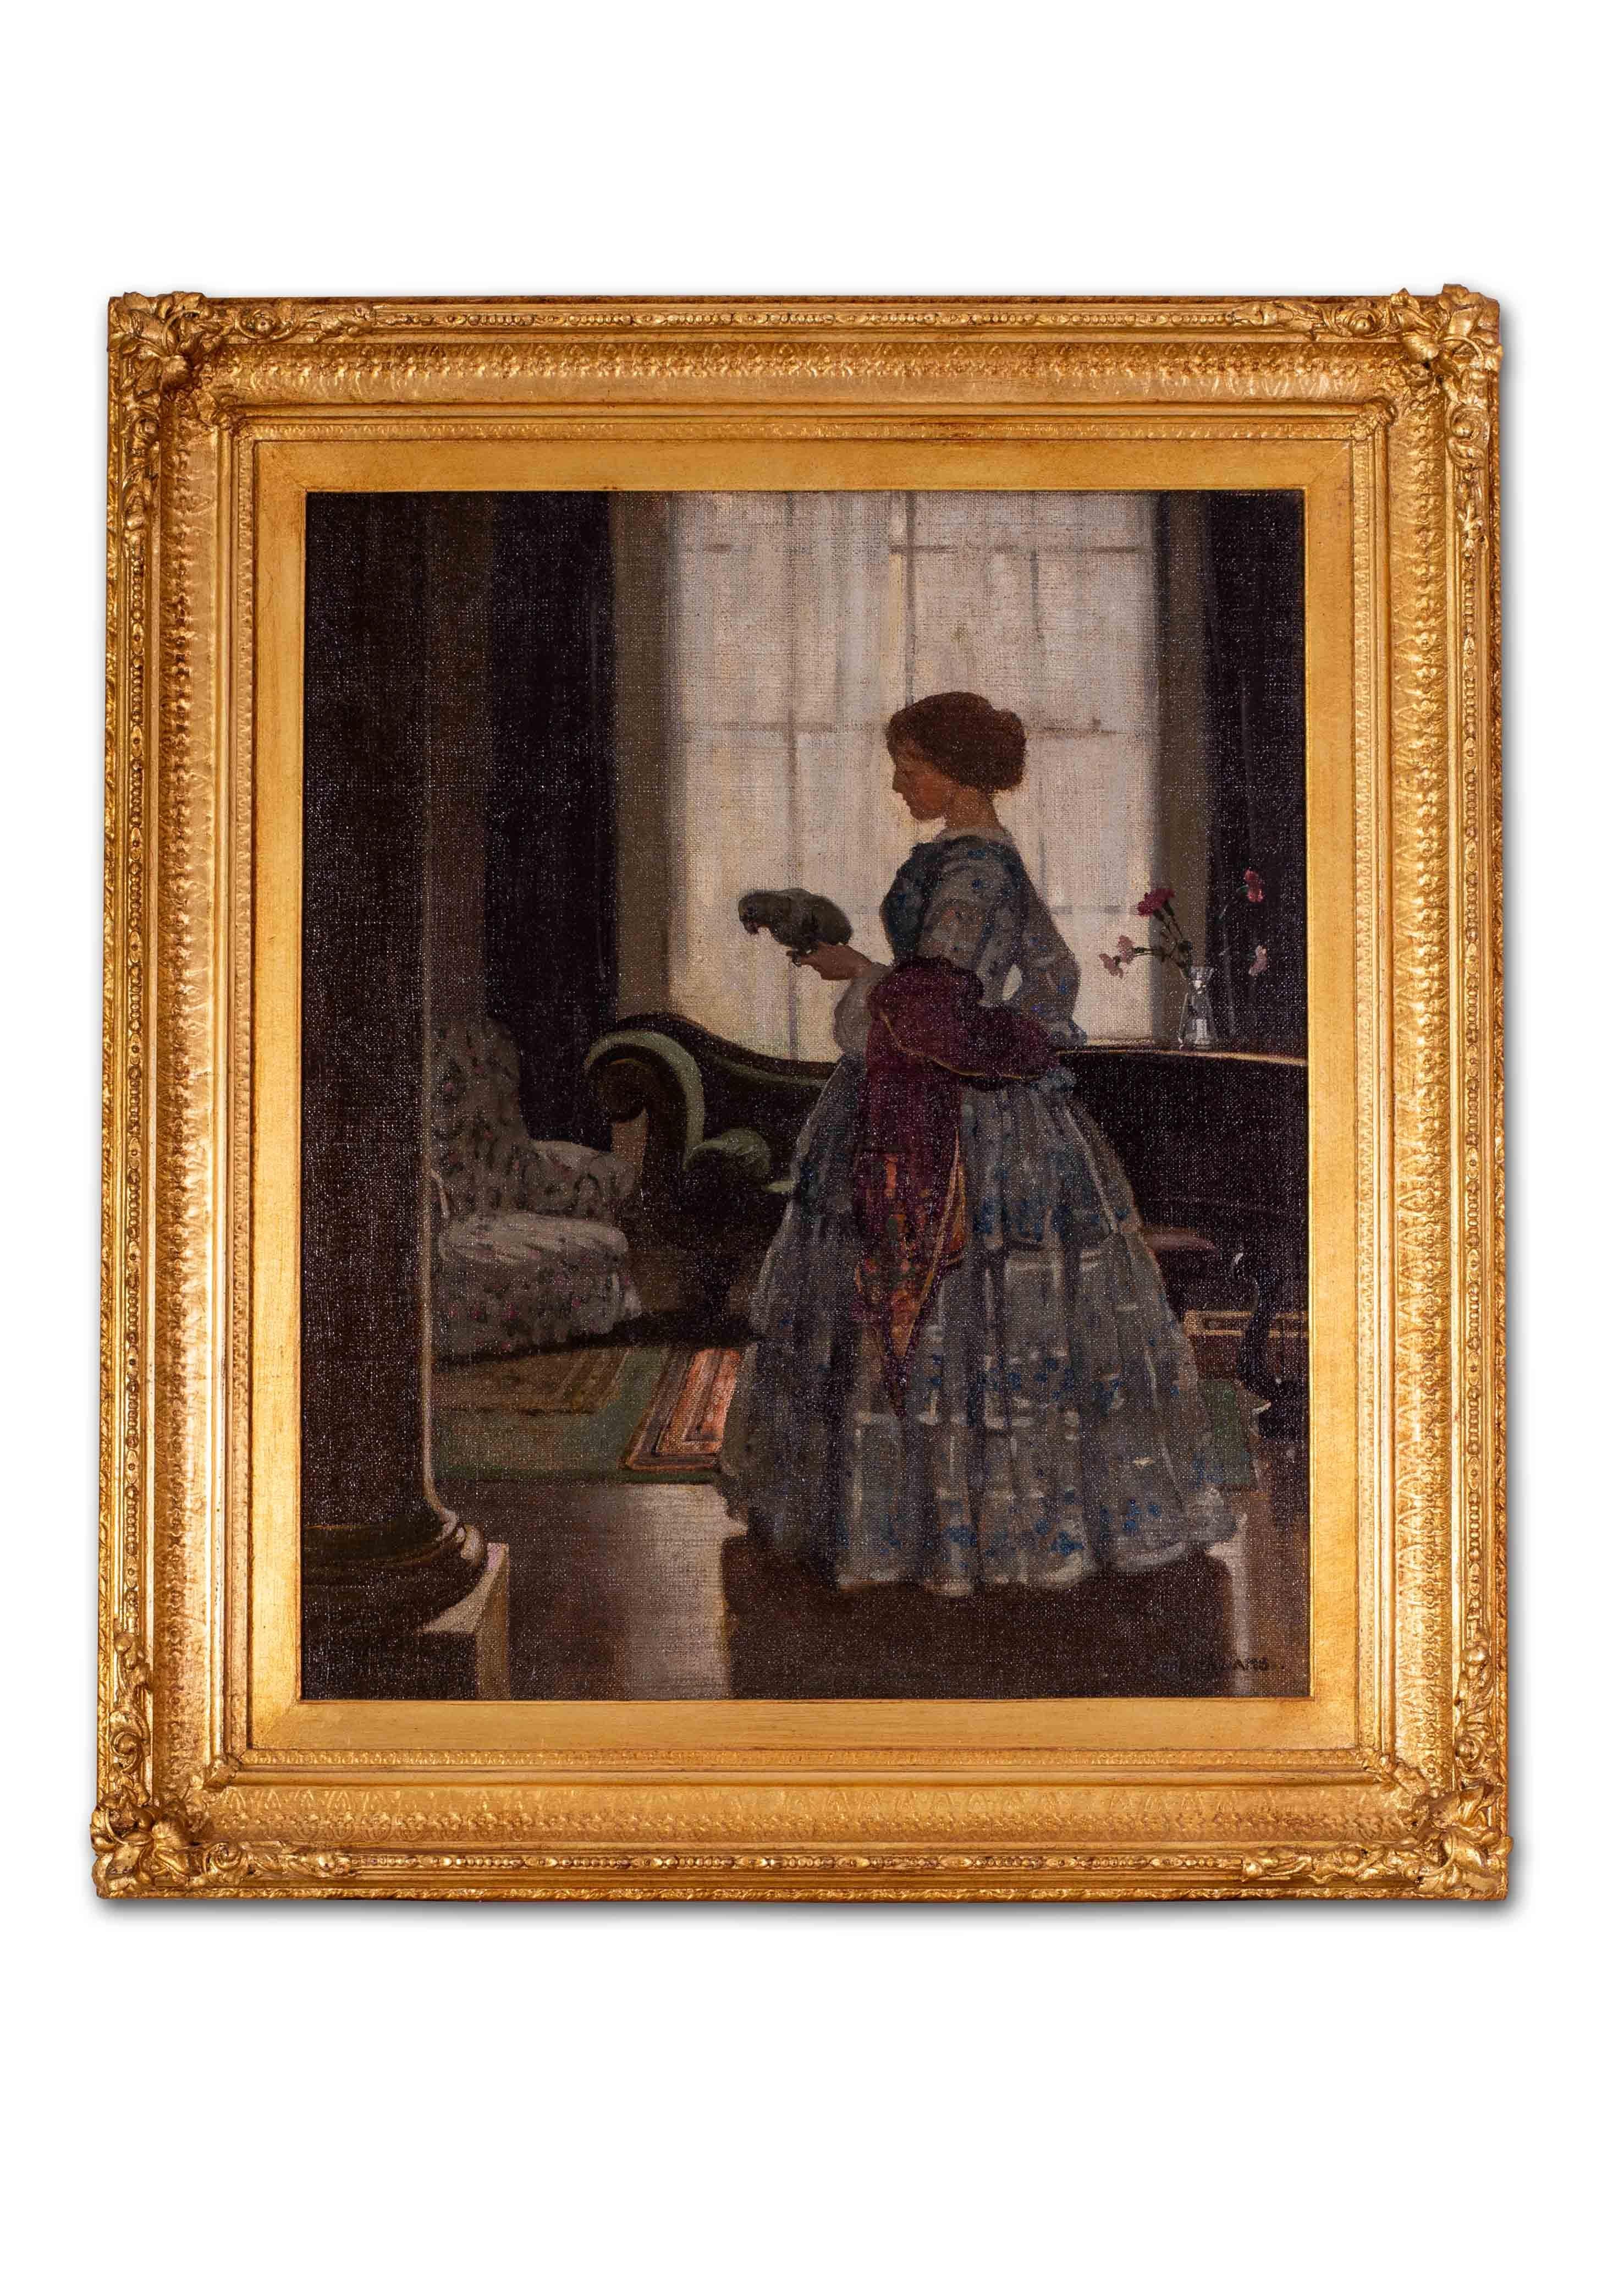 William Dacre Adams (British, 1864 – 1951)
A young lady holding a parrot in the piano room
Signed ‘W D ADAMS’ (lower right)
Oil on canvas
24 x 20 in. (61 x 51cm.)


Painter and lithographer of portraits and architectural subjects, born in Reading.